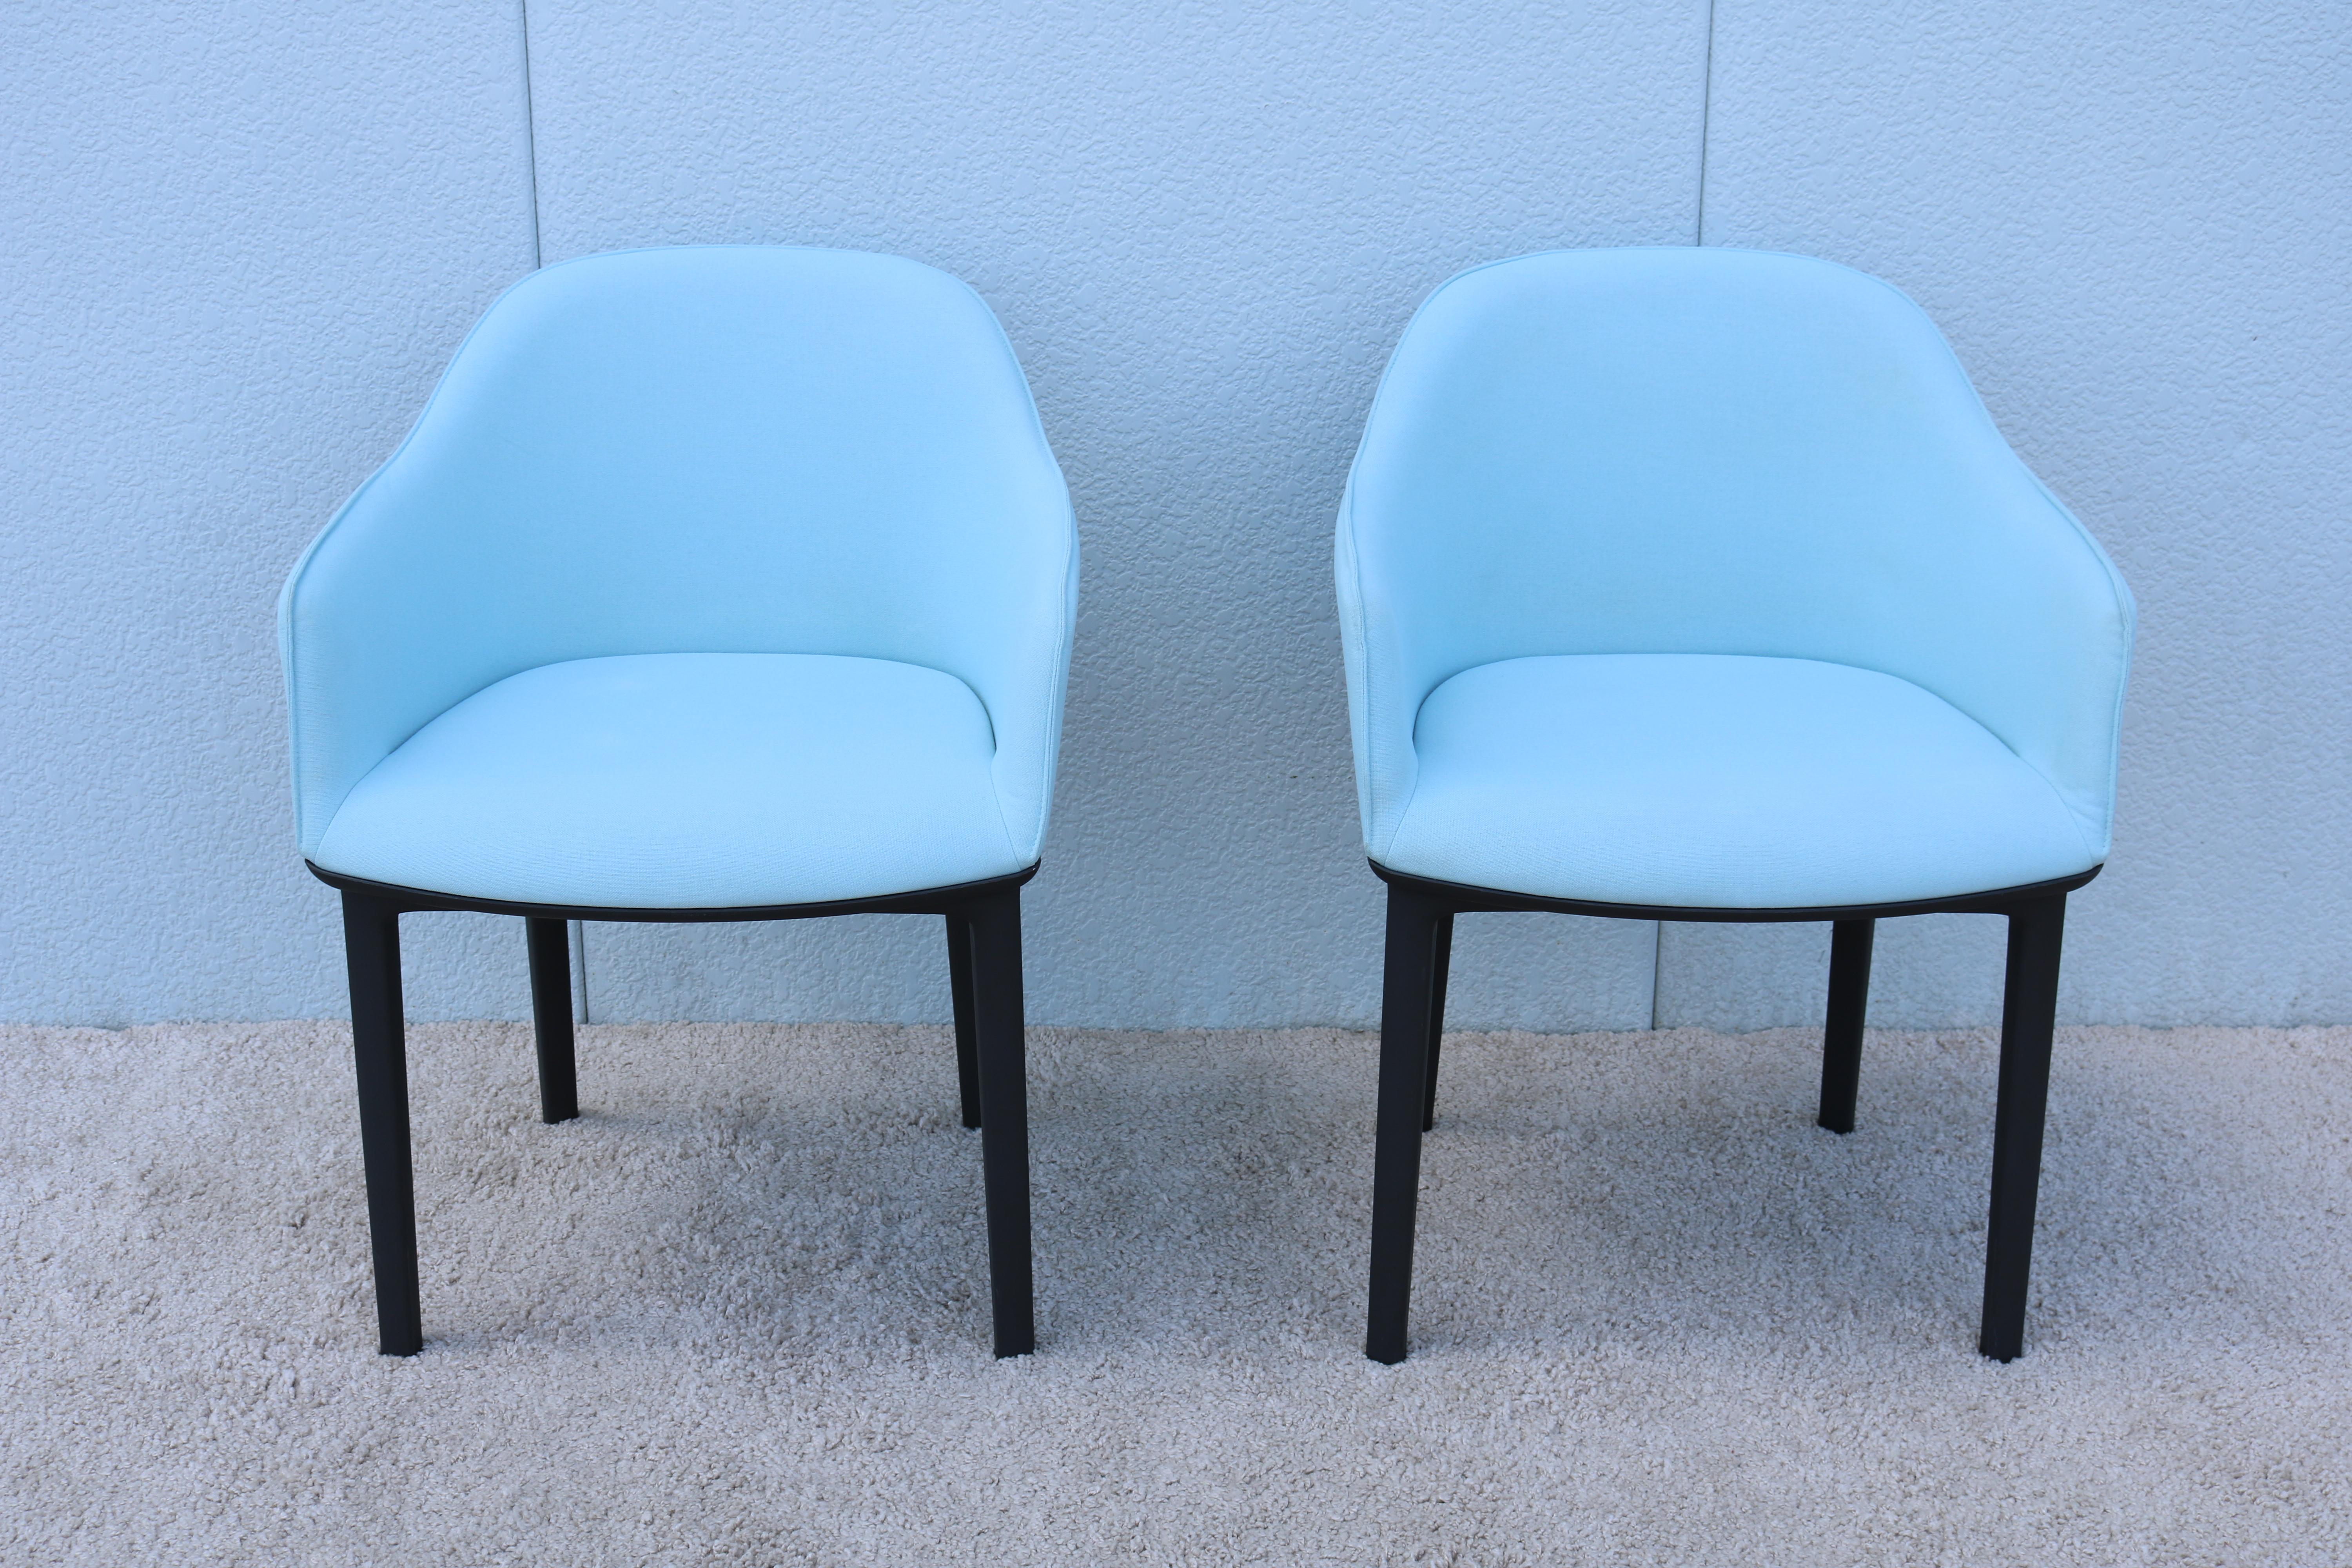 Modern Ronan and Erwan Bouroullec for Vitra Ice Blue Softshell Chairs, a Pair For Sale 3